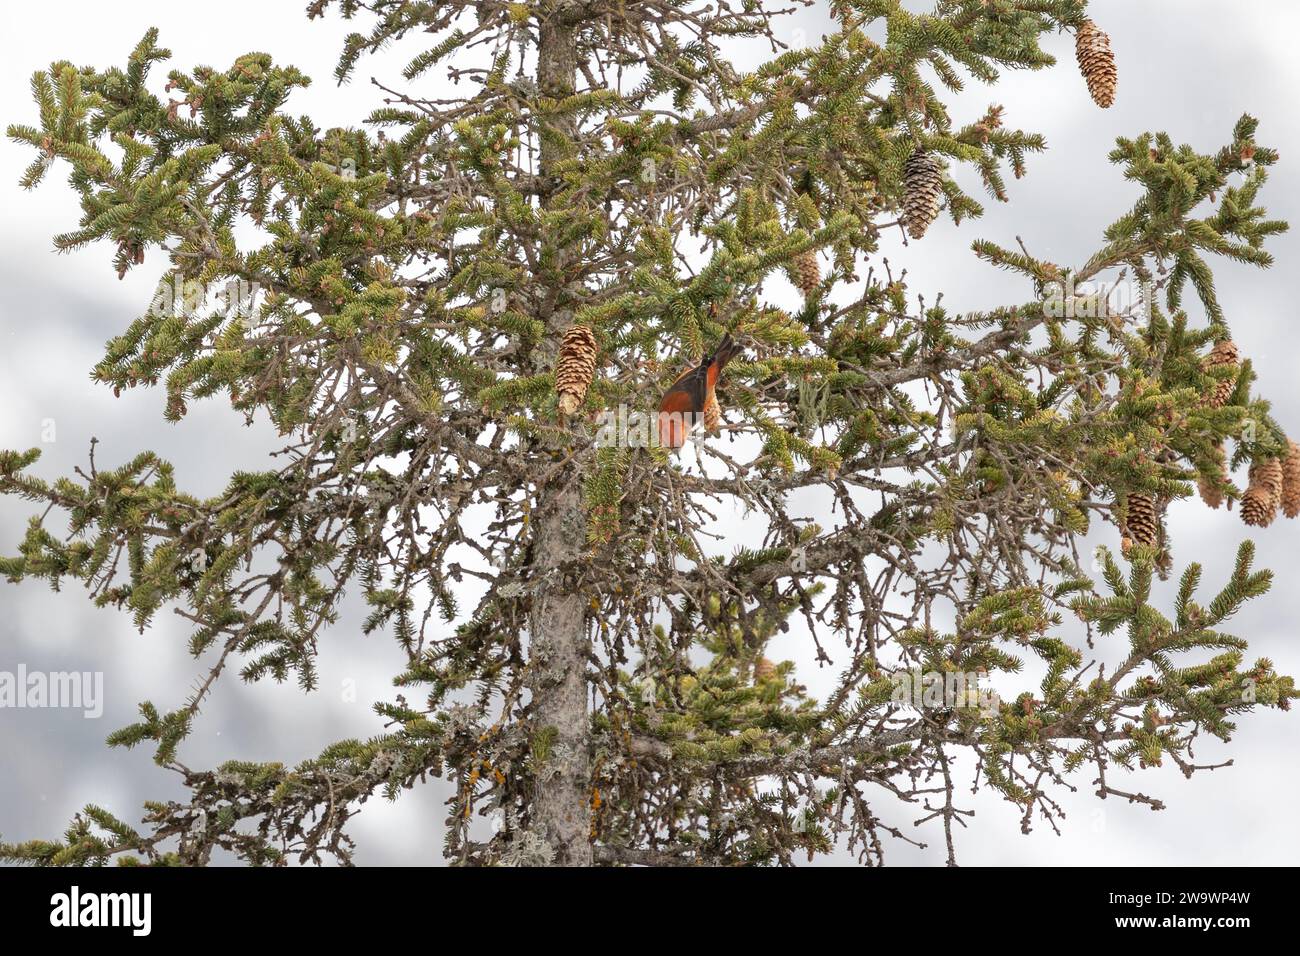 Red or common male crossbill (loxia curvirostra) feeding on a pine cone in the top of a conifer tree in the dolomite mountain region of Italy. Stock Photo